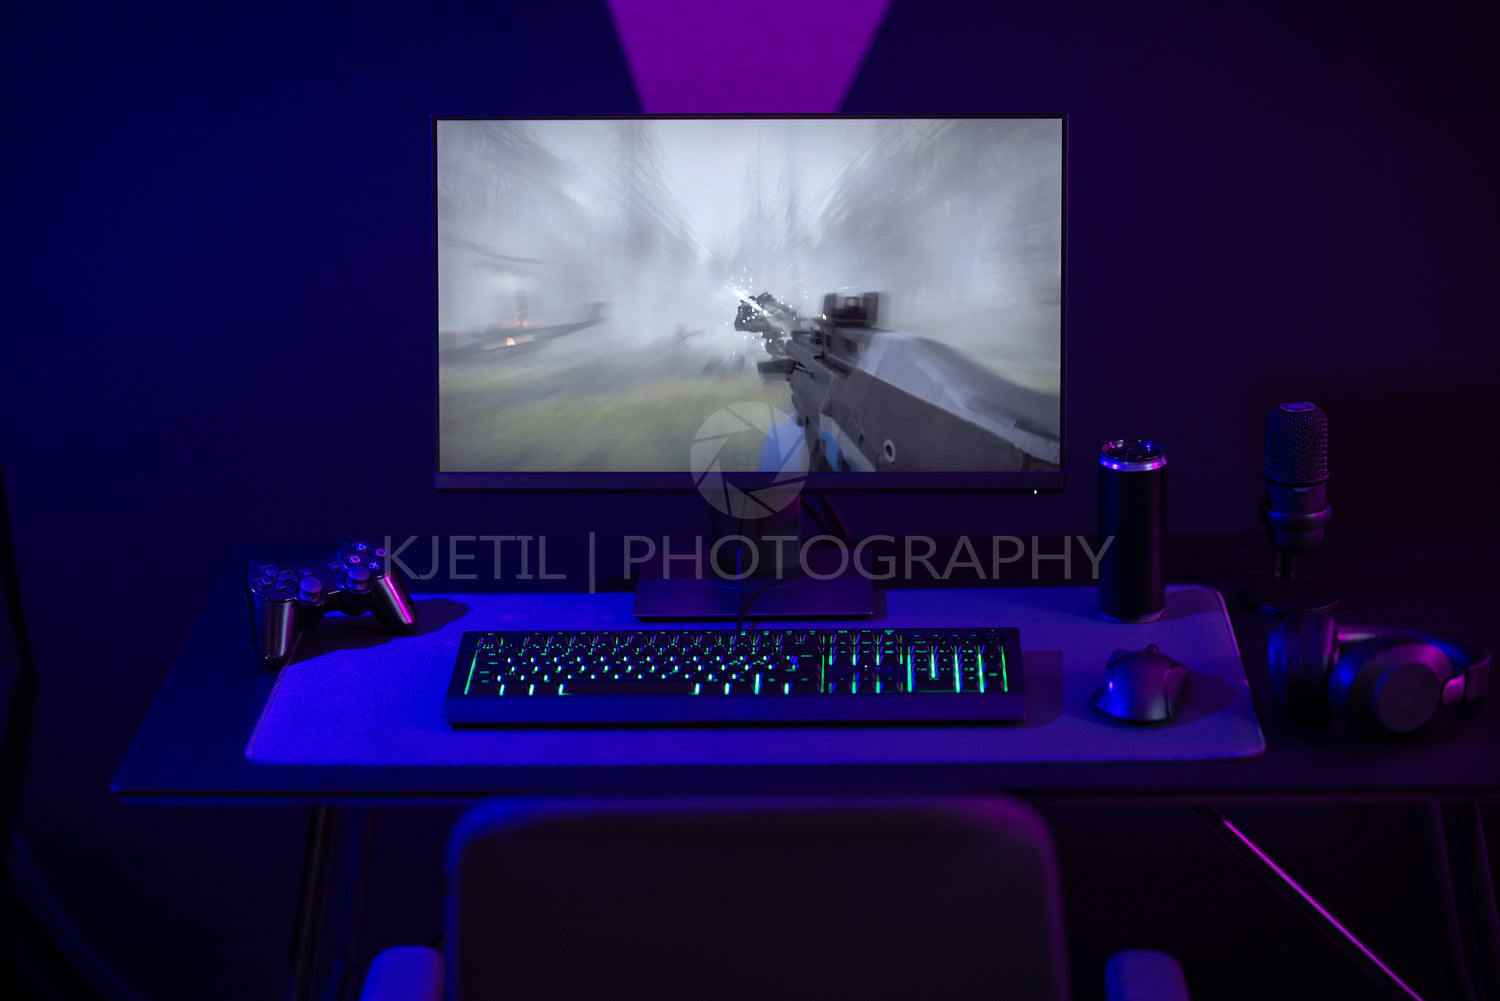 Professional LED lid e-sport gaming studio with first-person shooter online video game on computer monitor